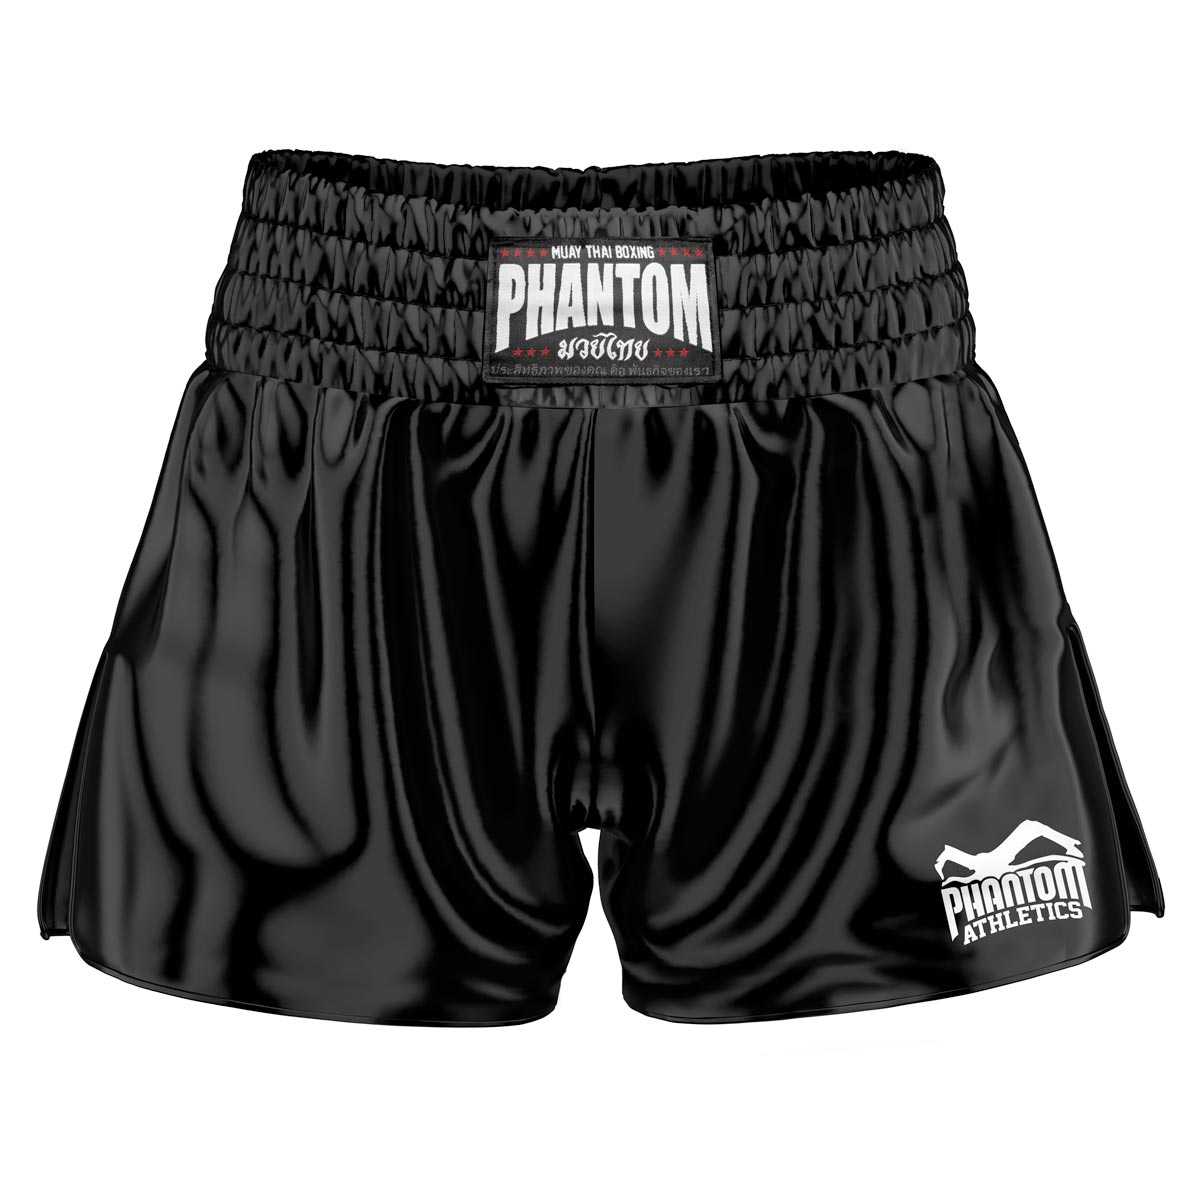 The Phantom Muay Thai Shorts Team in black. Old school satin fabric gives you an original Thailand feeling. In the usual Phantom Athletics quality. Ideal for your Thai boxing training and competition.